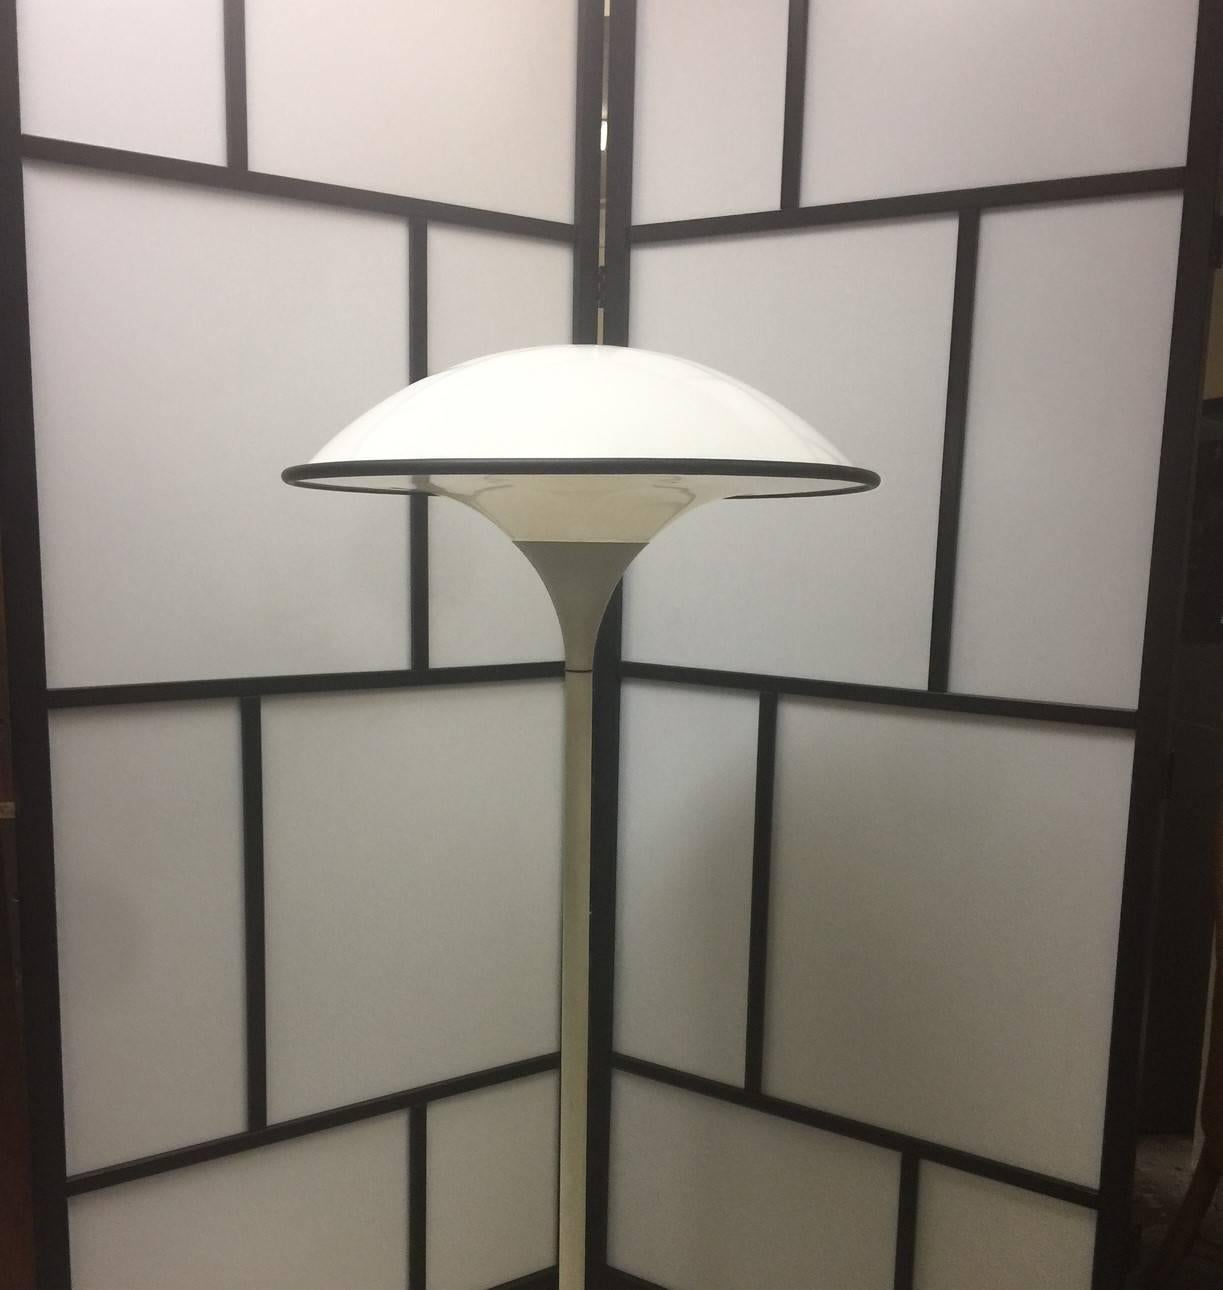 A modernist floor lamp by one of Denmark’s most highly regarded lighting manufacturers, Fog & Mørup, Denmark. The designer is Dansk, produced 1960-1975. A white perspex hood with black rubber edging sits on top of a metal stem giving a warm diffused